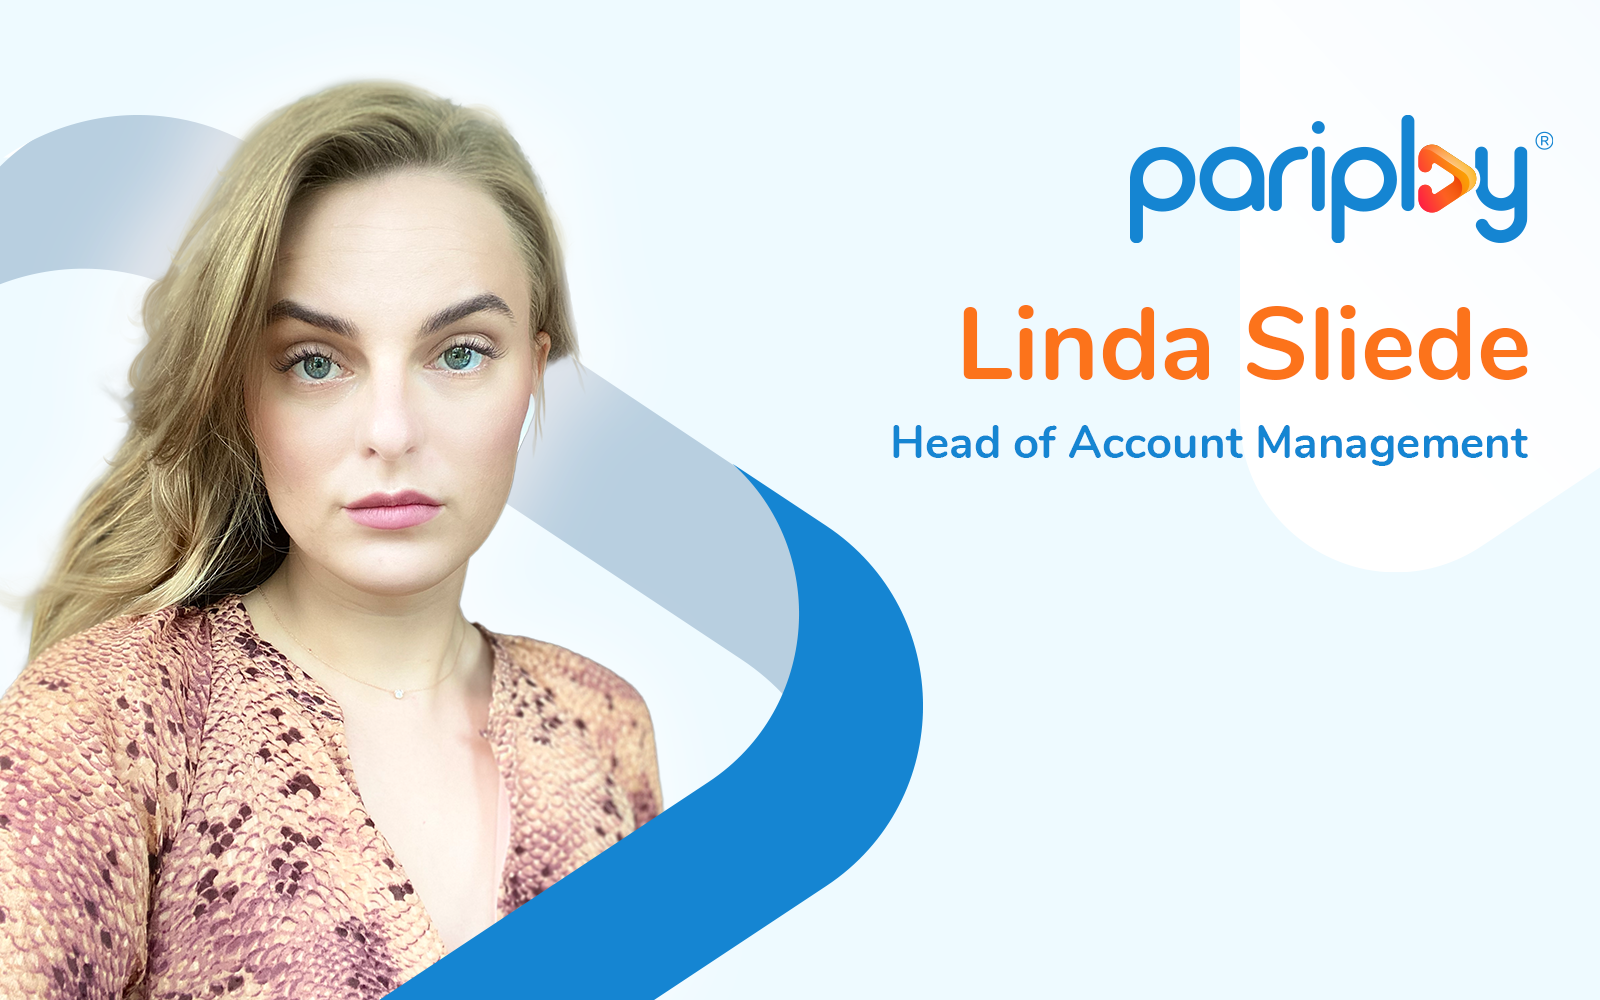 Neogames’ Pariplay Ltd, the leading aggregator and content provider, has appointed Linda Sliede to Head of Account Management